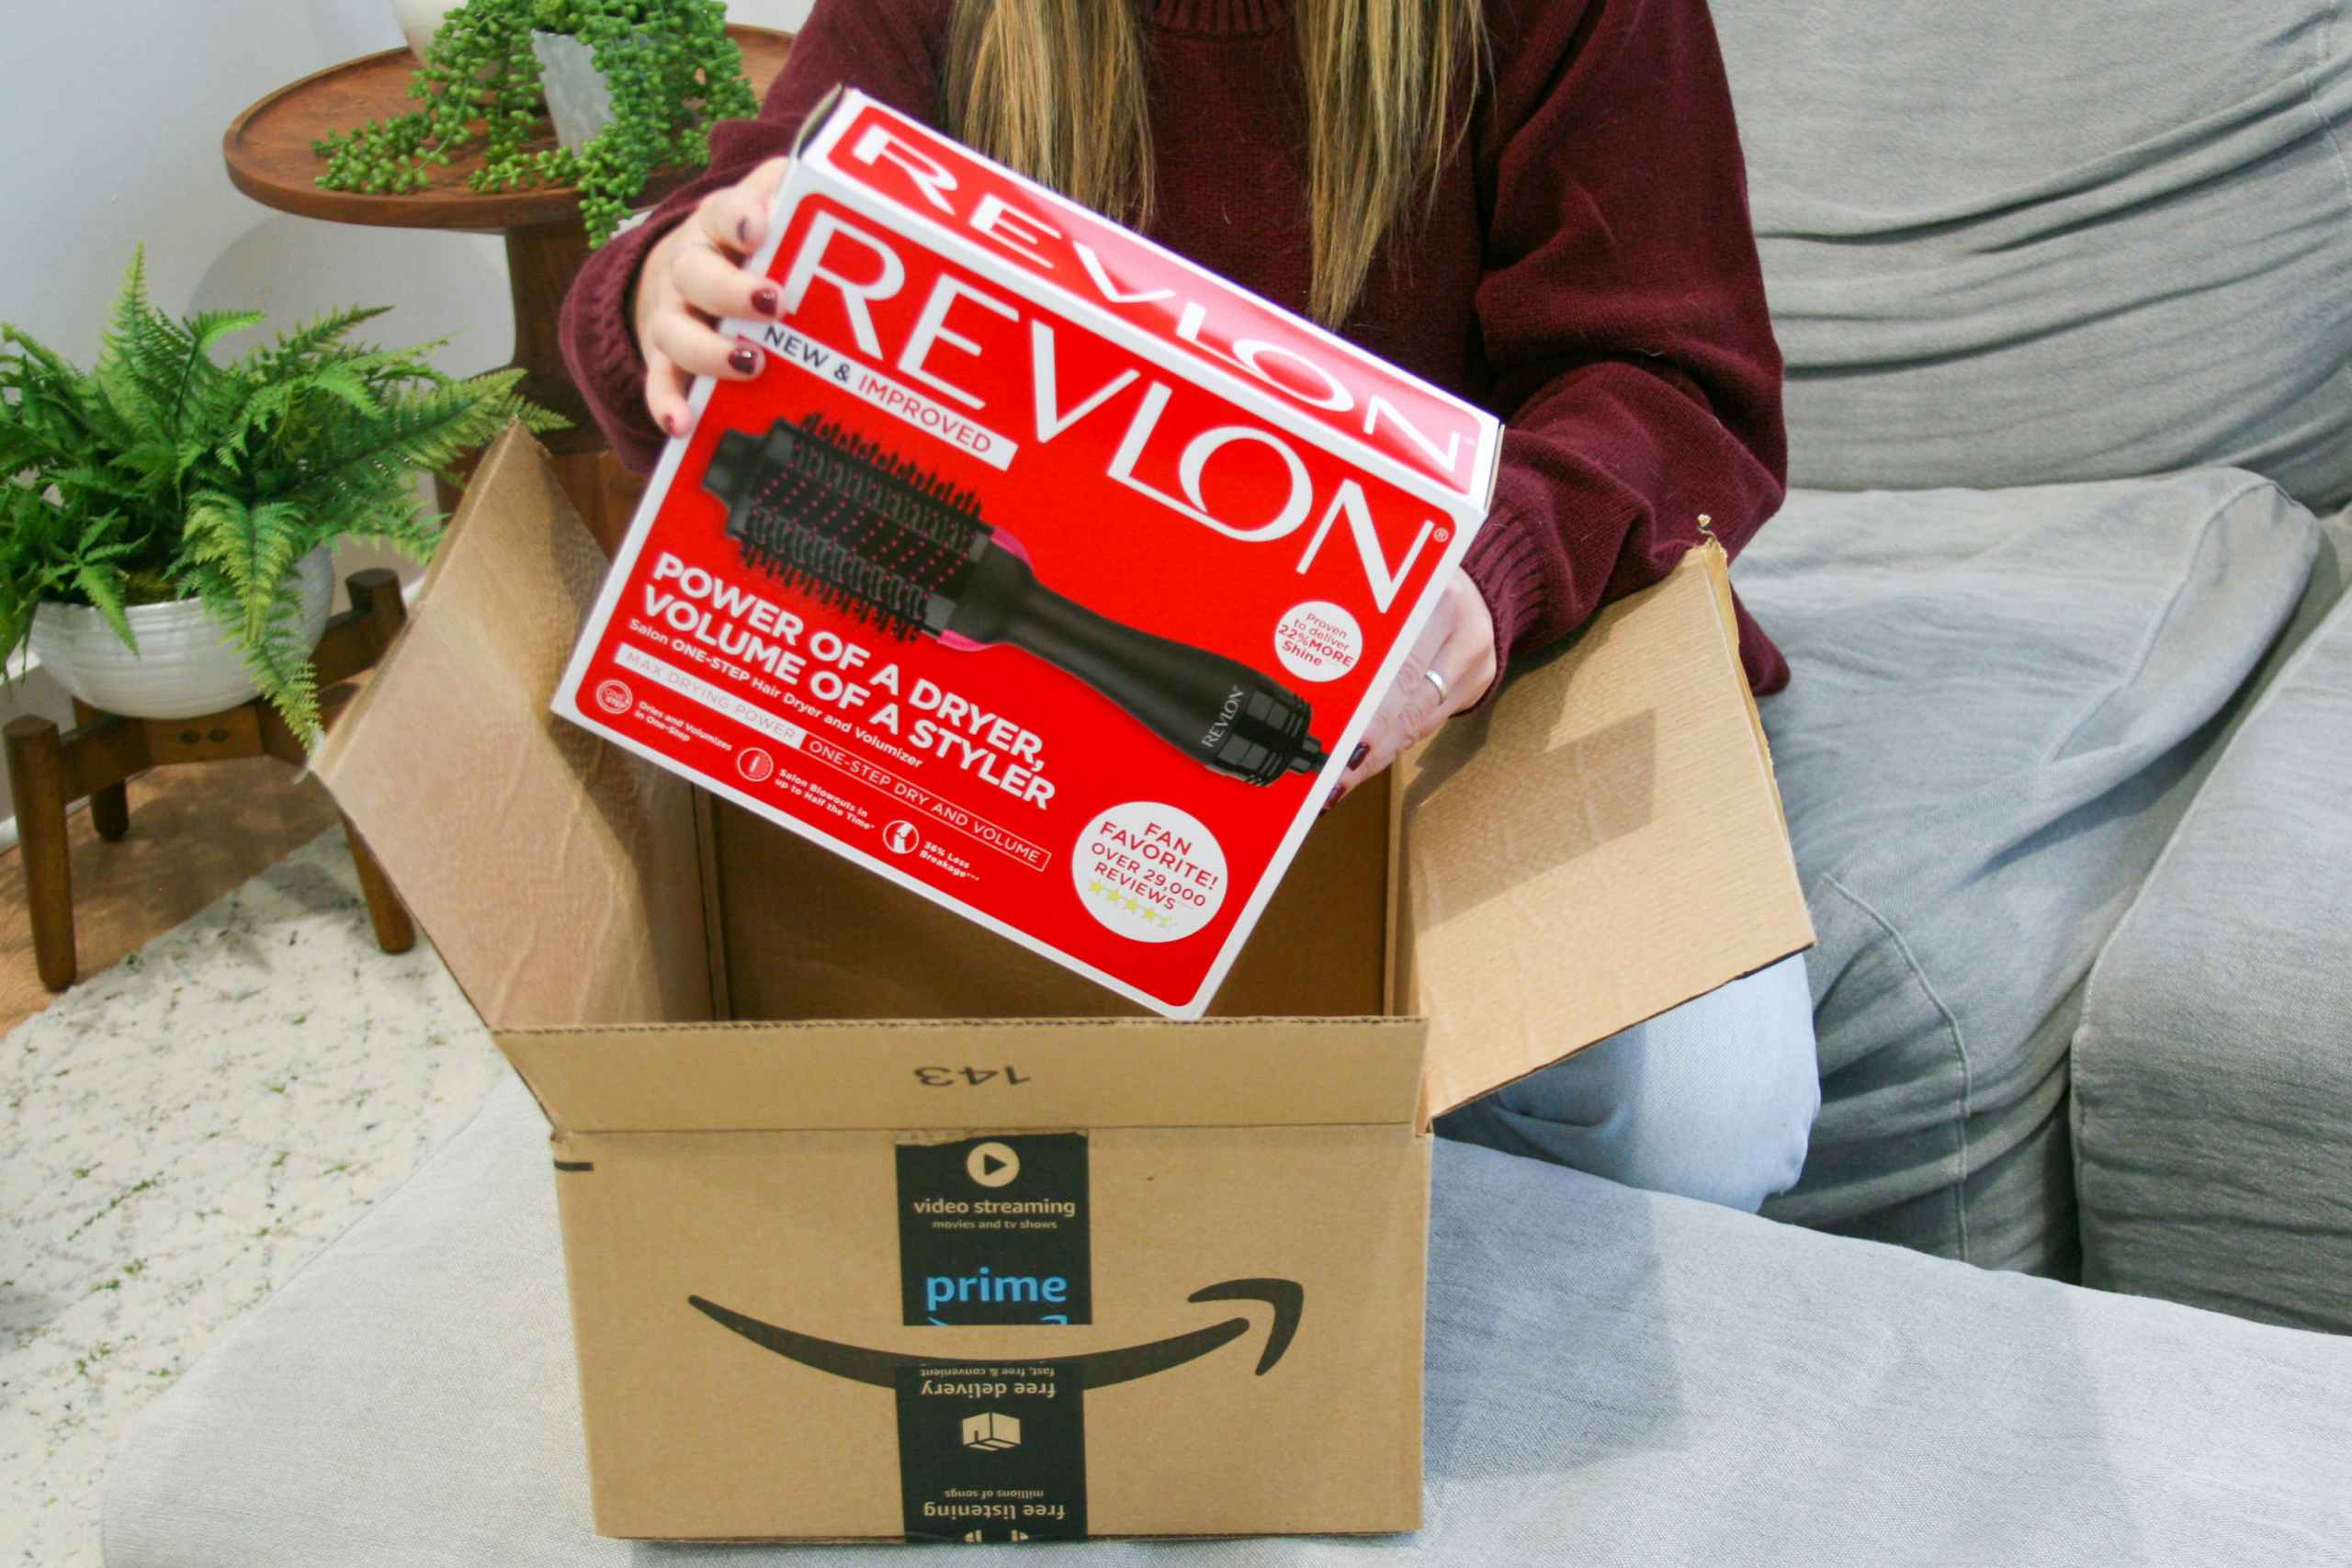 revlon dryer brush being removed from amazon box